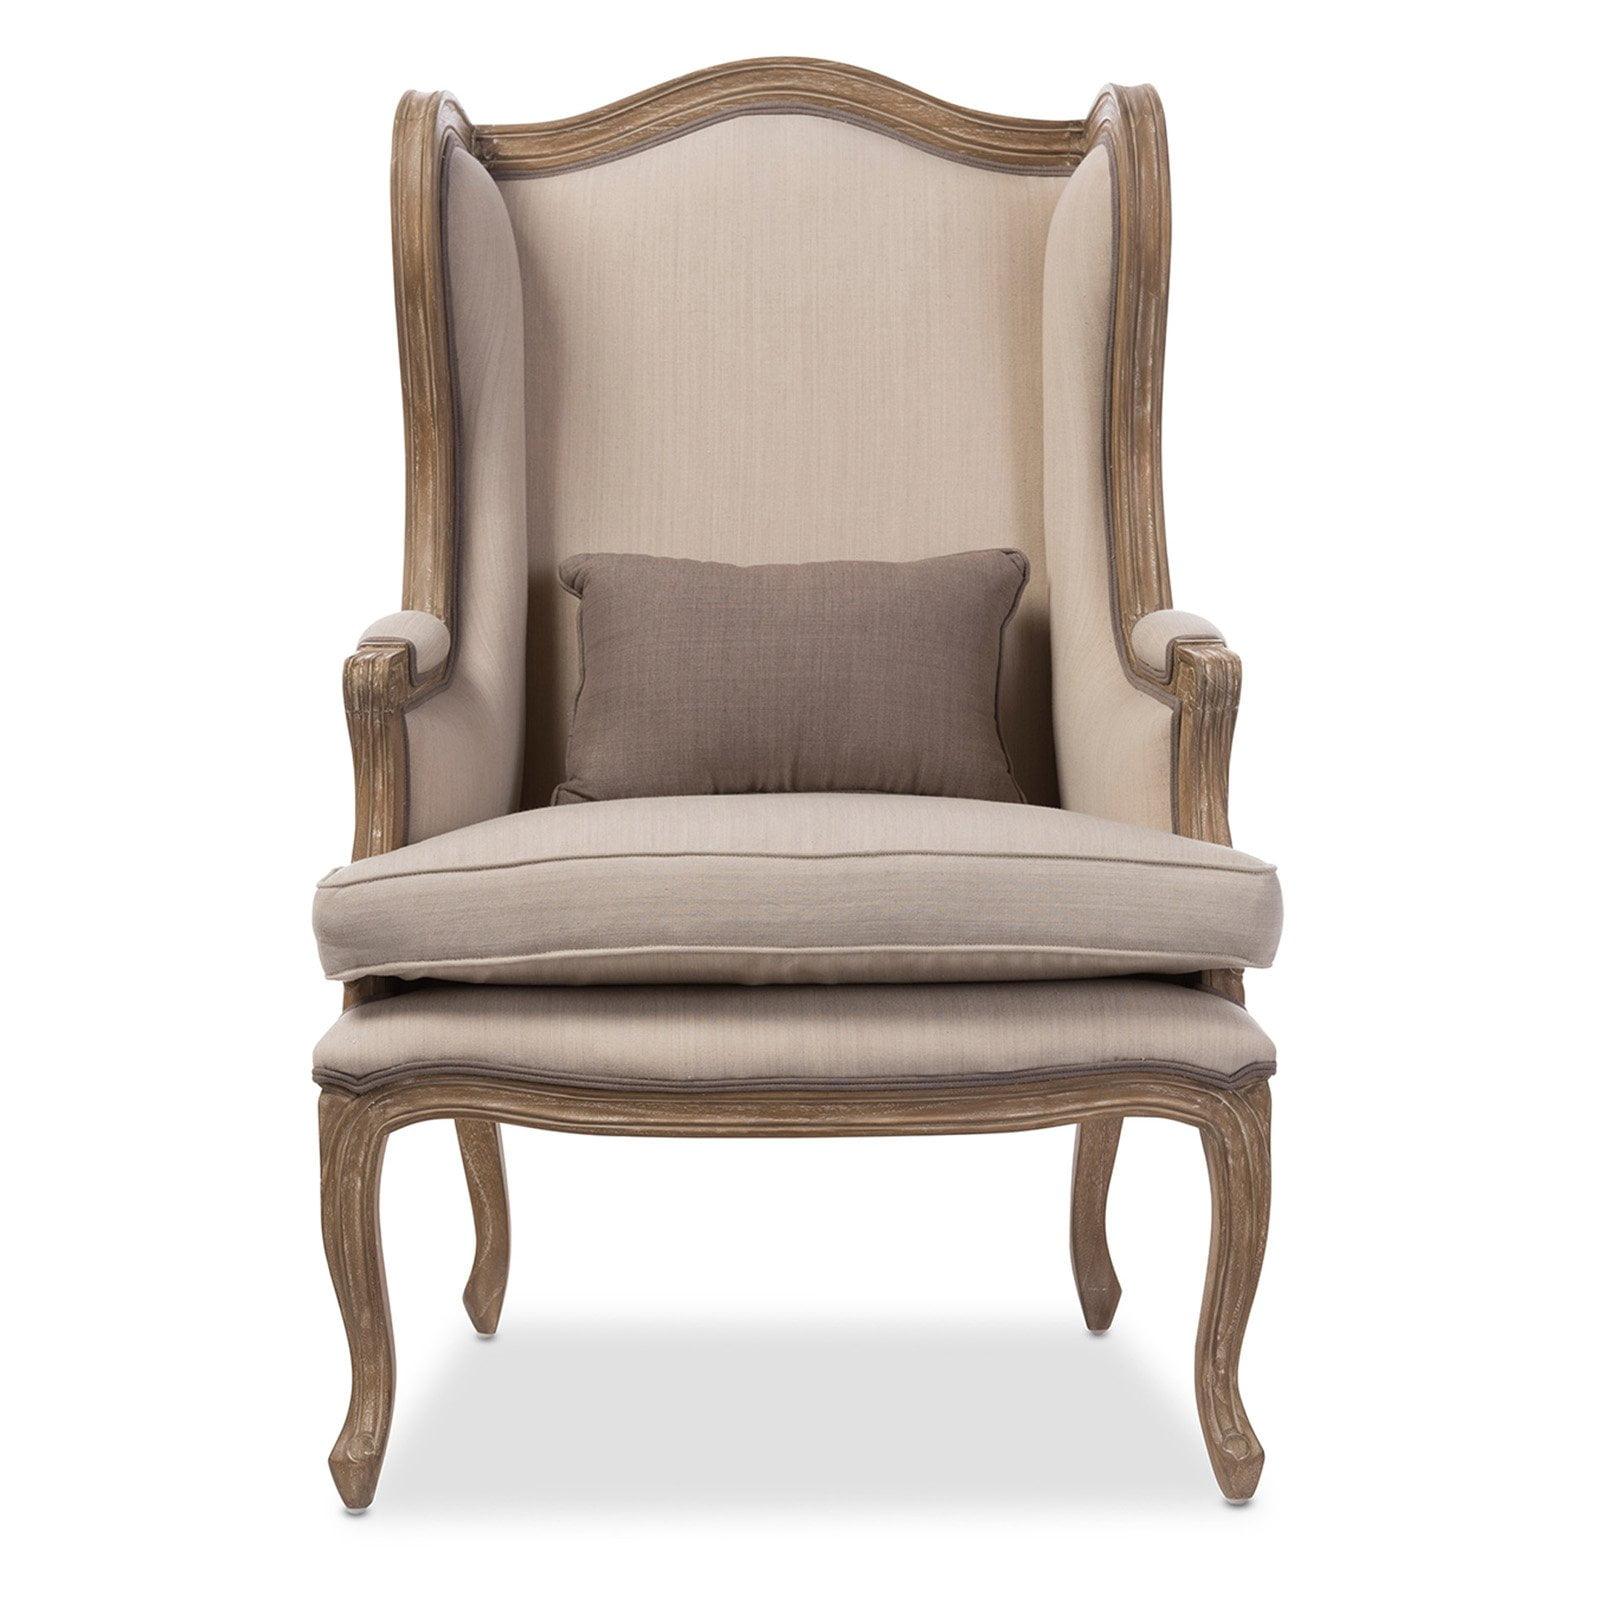 Majestic Beige Wingback Handcrafted Wood Accent Chair